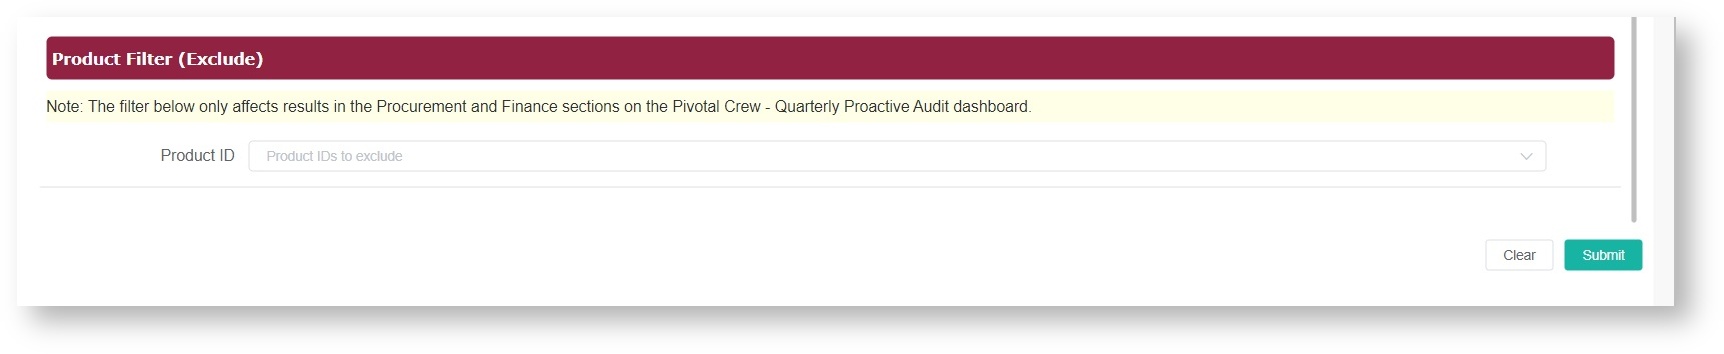 pivotal crew product filter